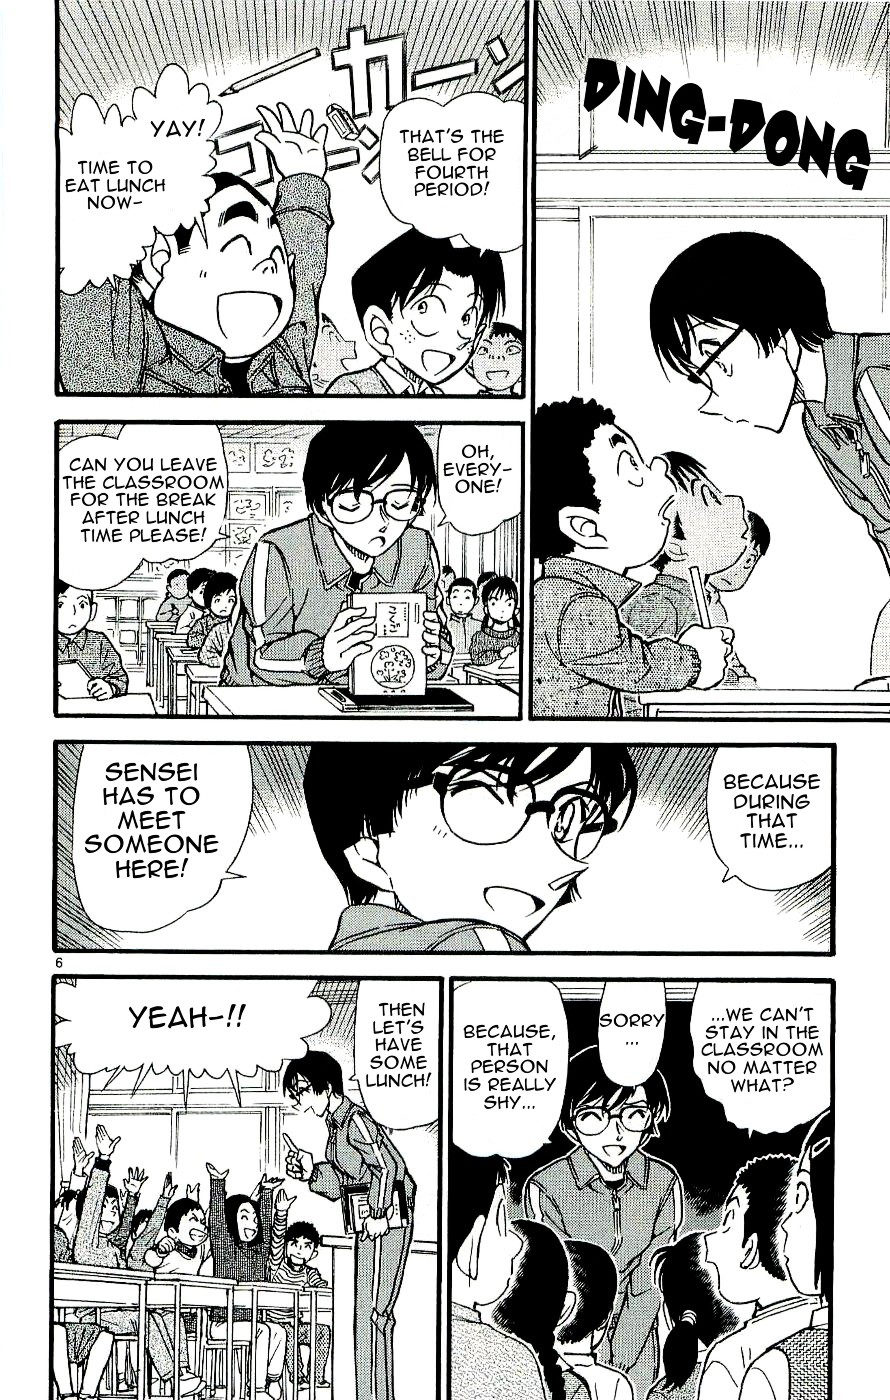 Detective Conan chapter 548 page 6